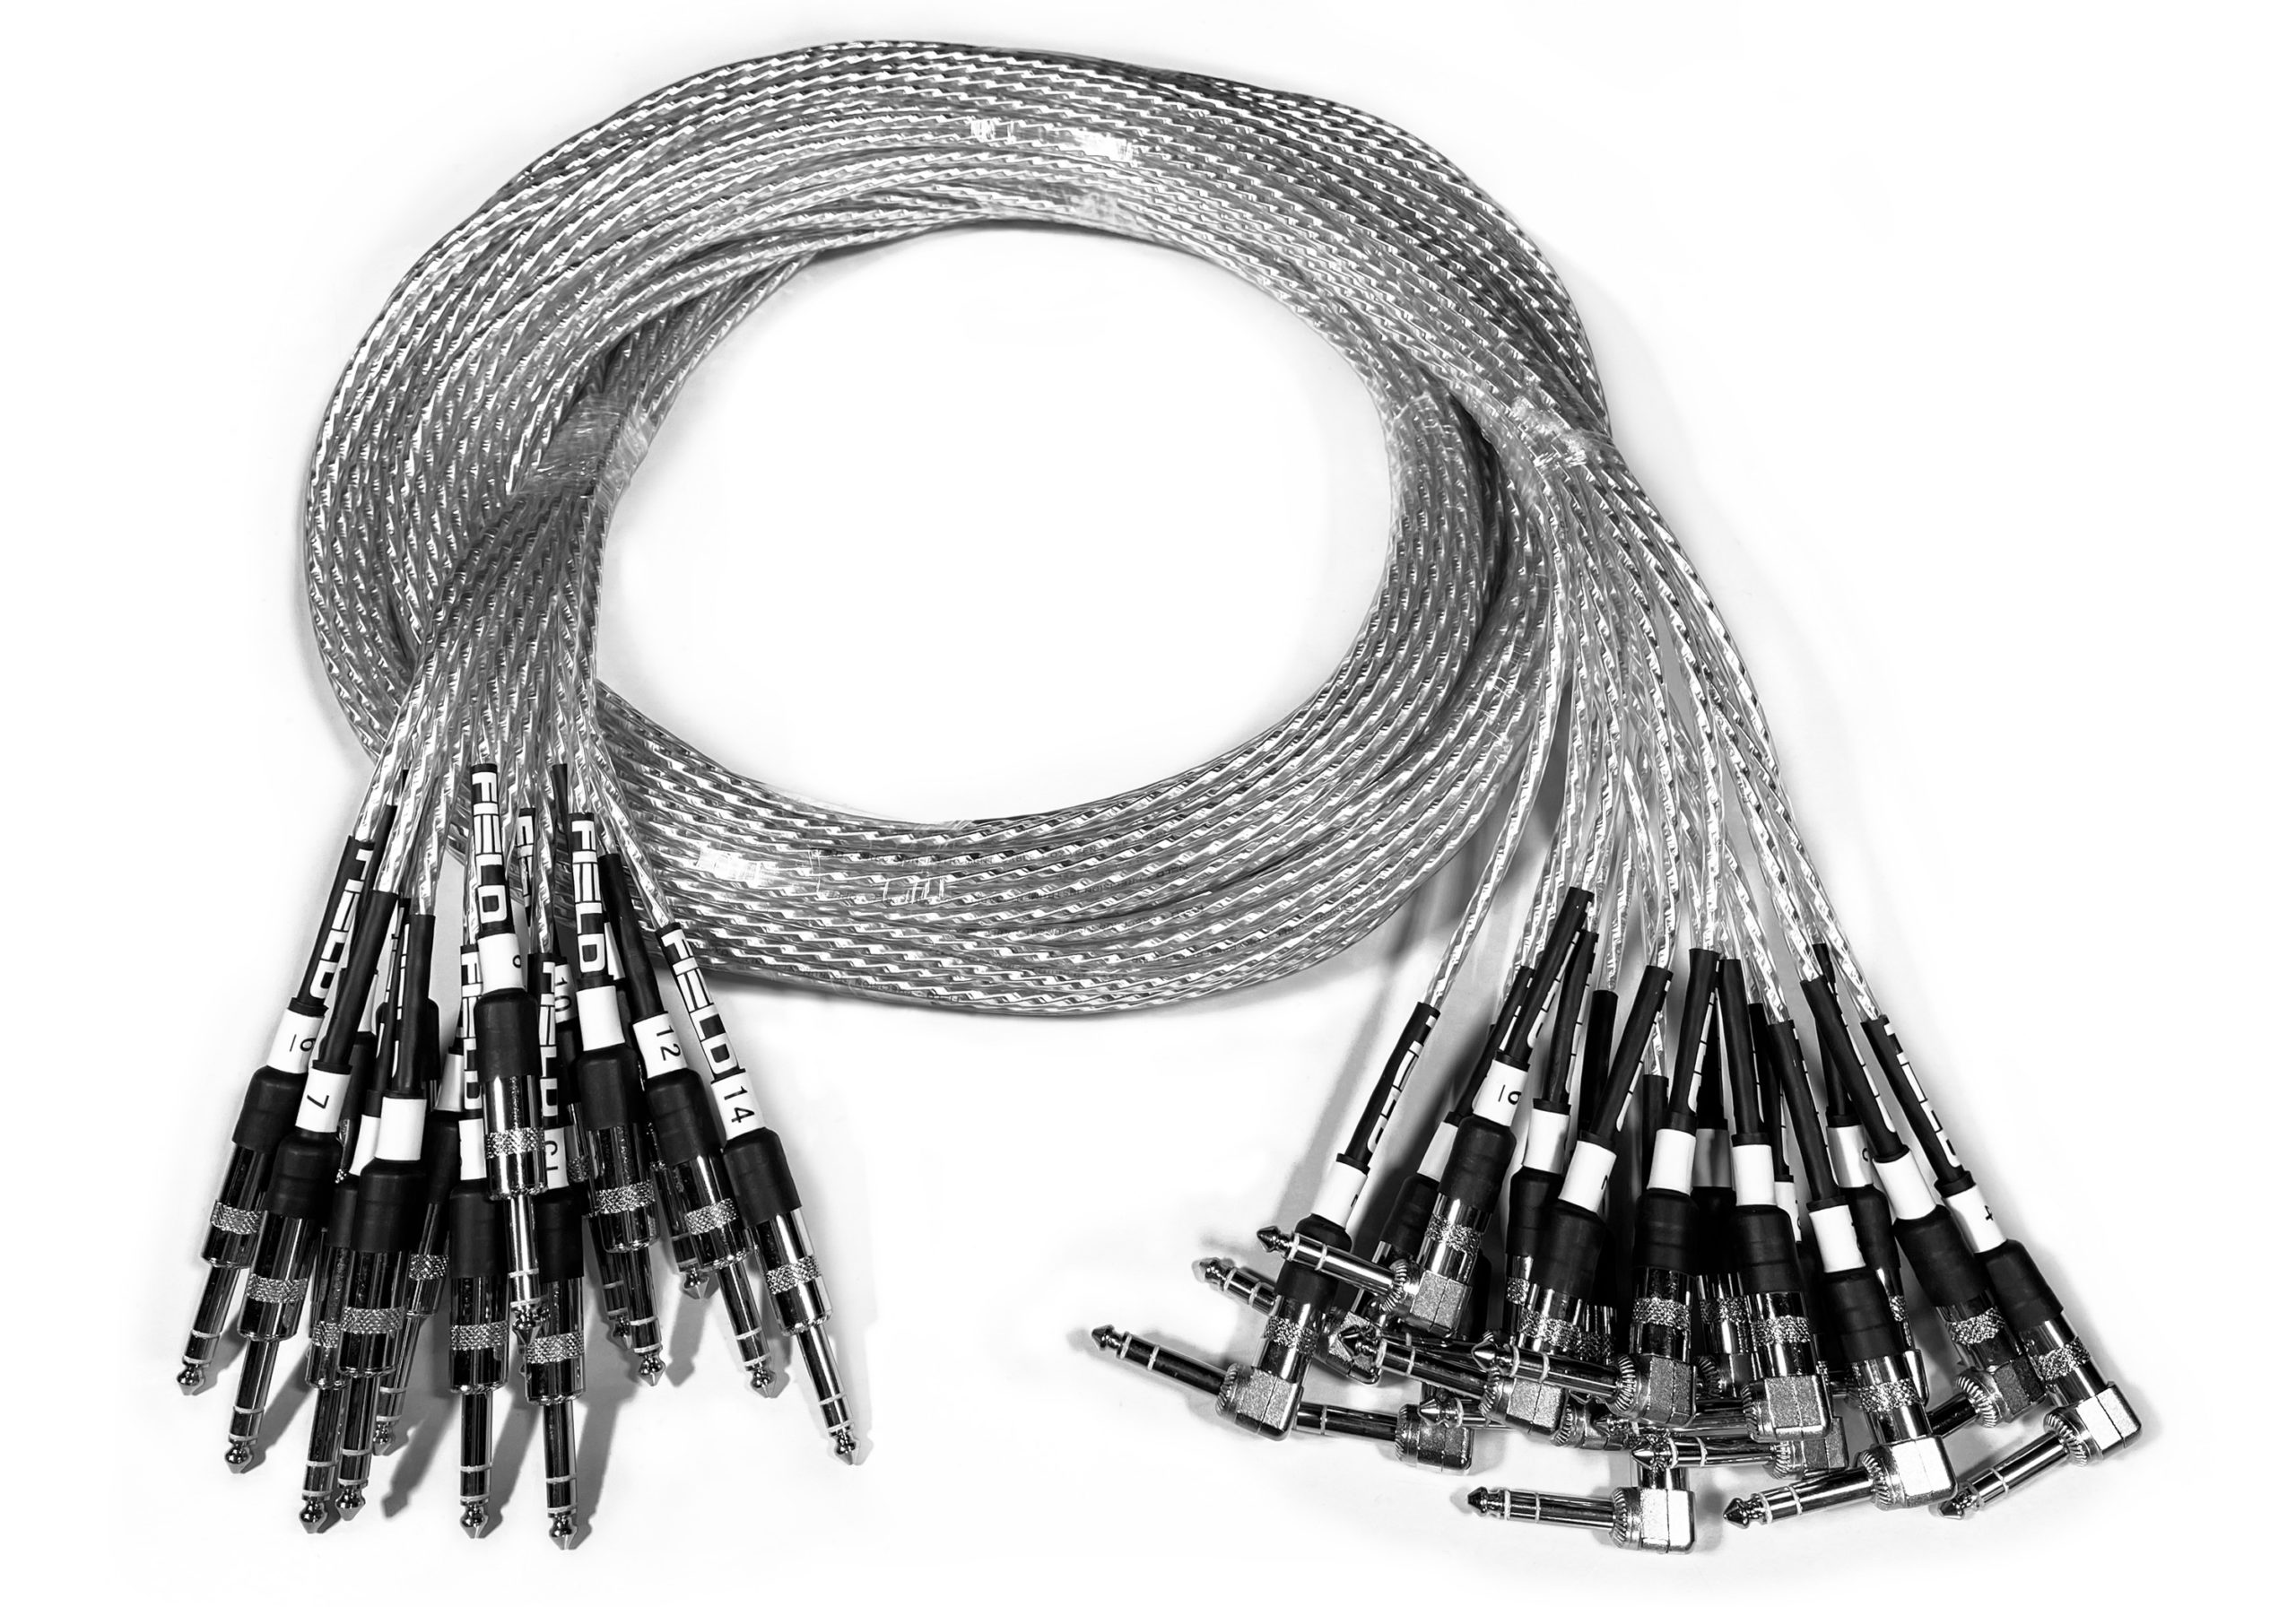 https://fieldelectronicdrums.com/wp-content/uploads/2022/08/CABLE-SET-3-scaled.jpg